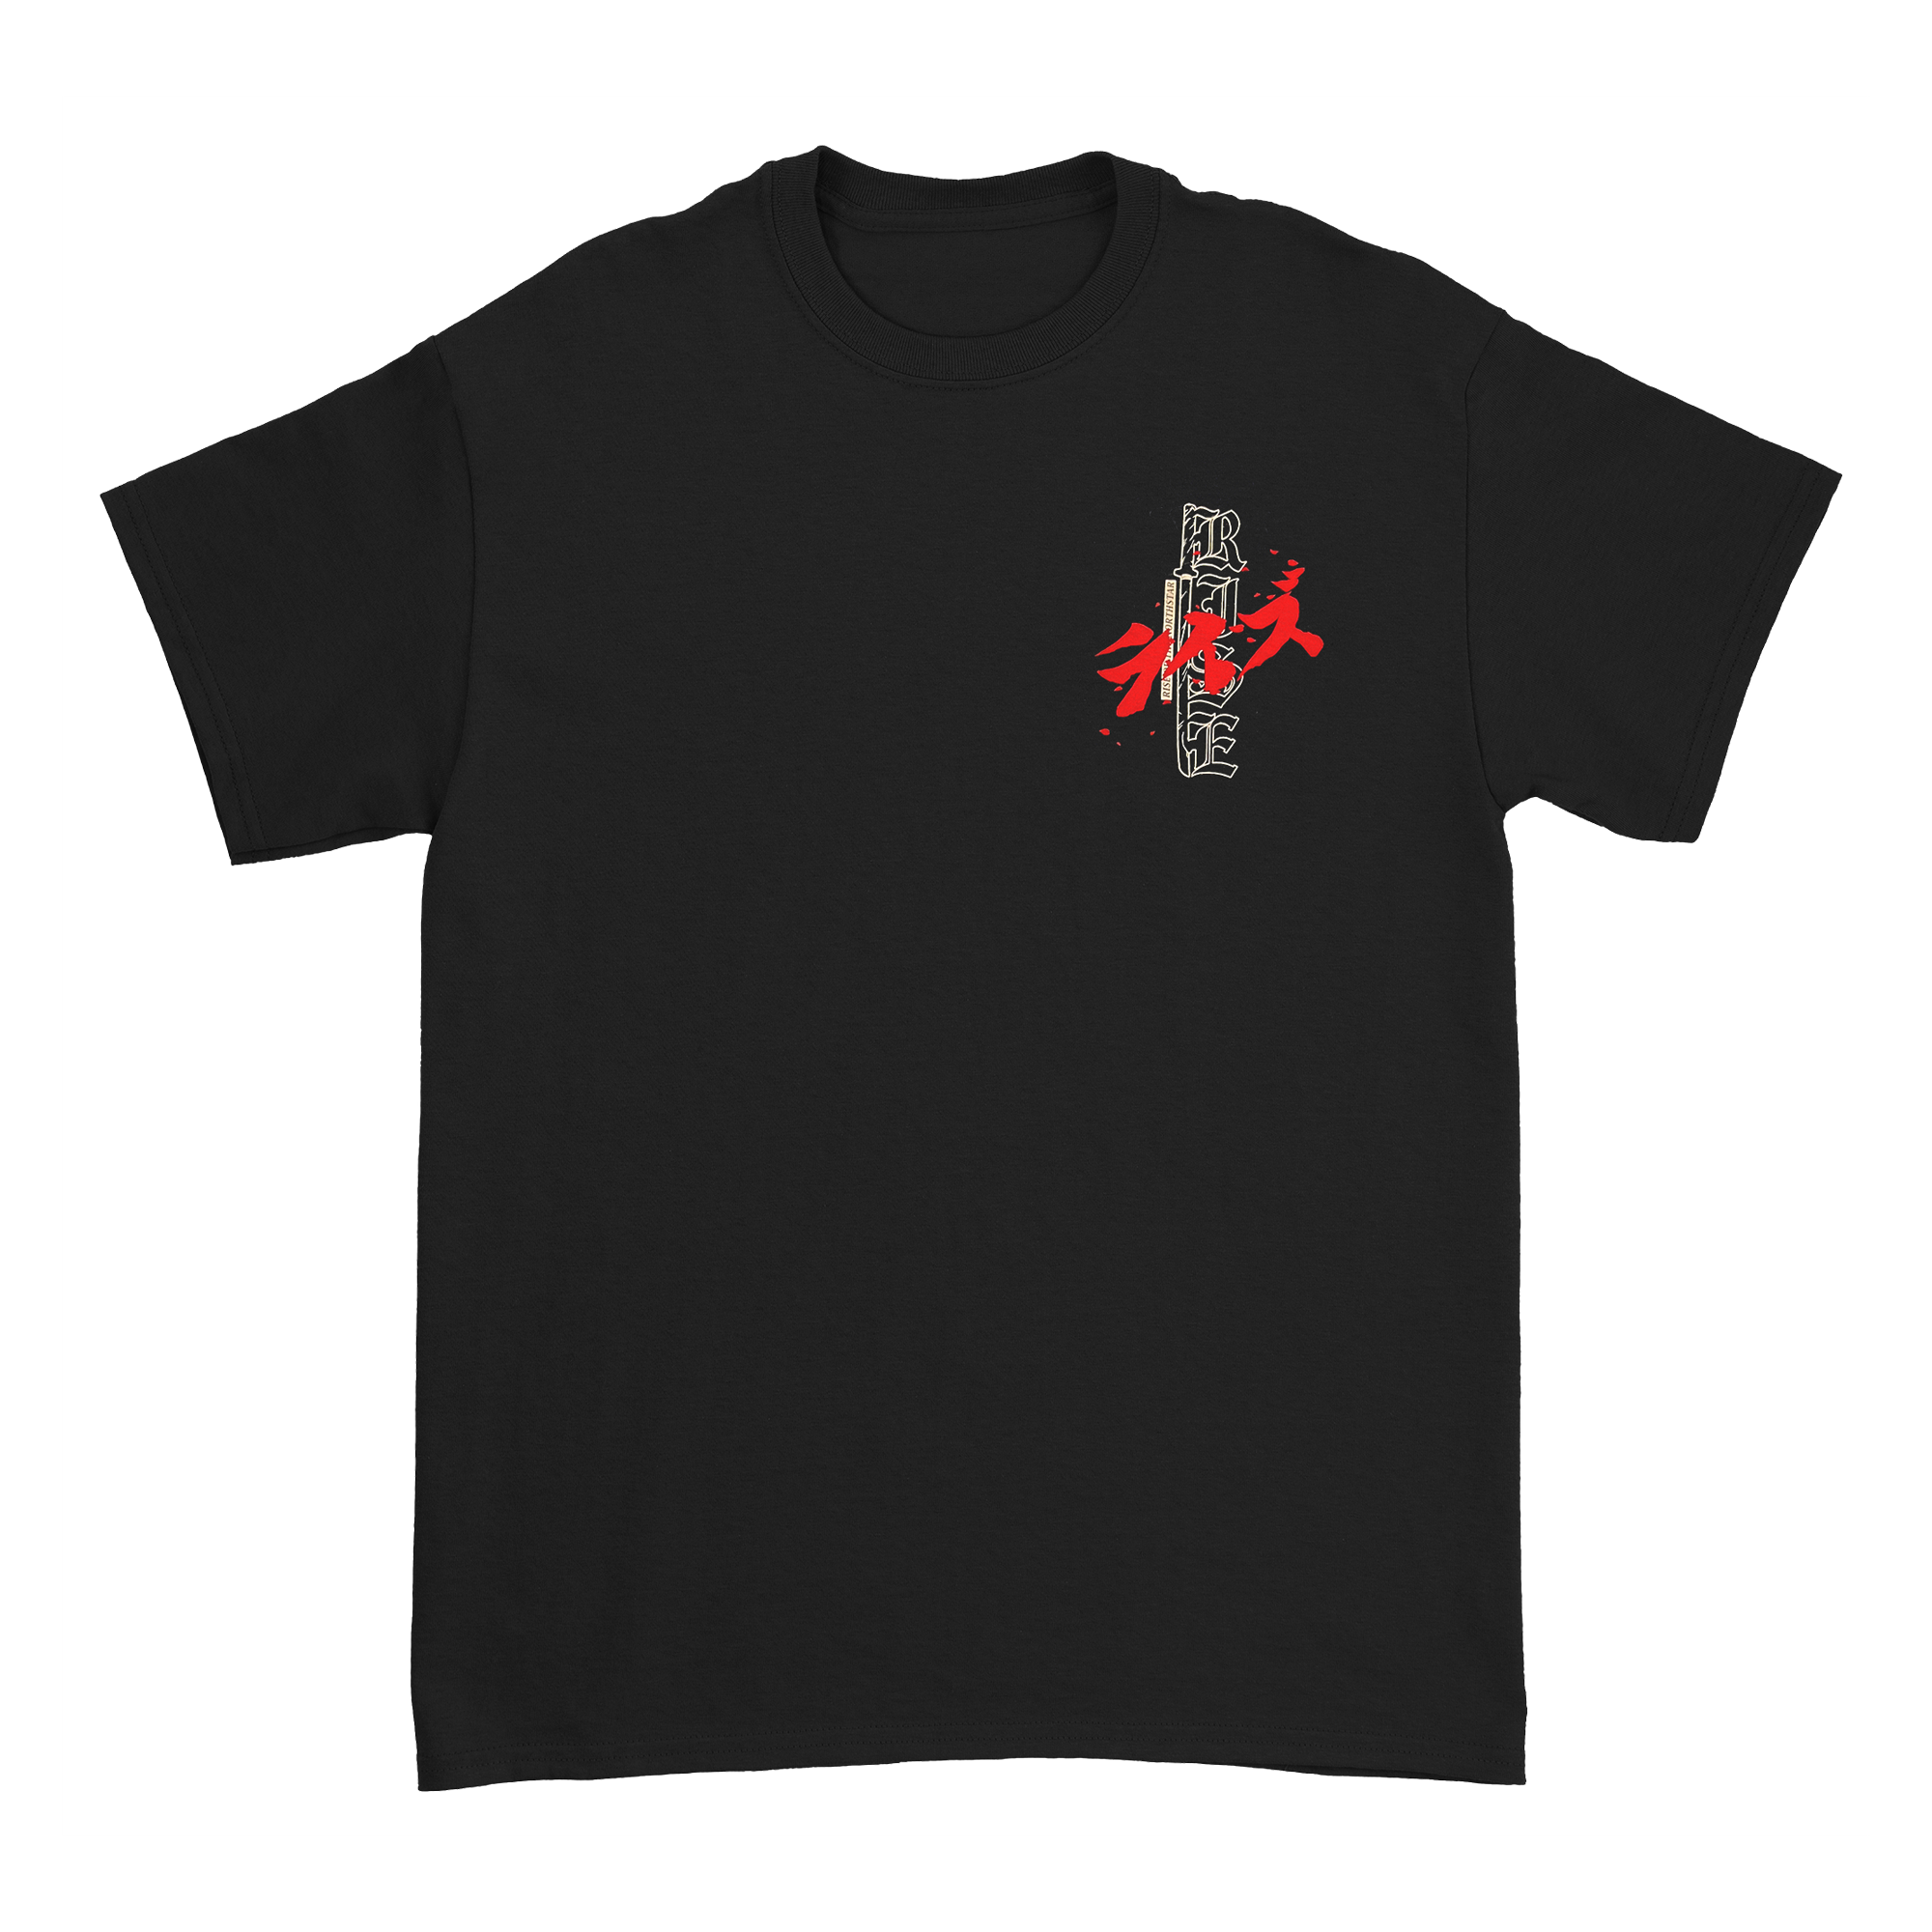 Rise of the Northstar - Sword T-Shirt